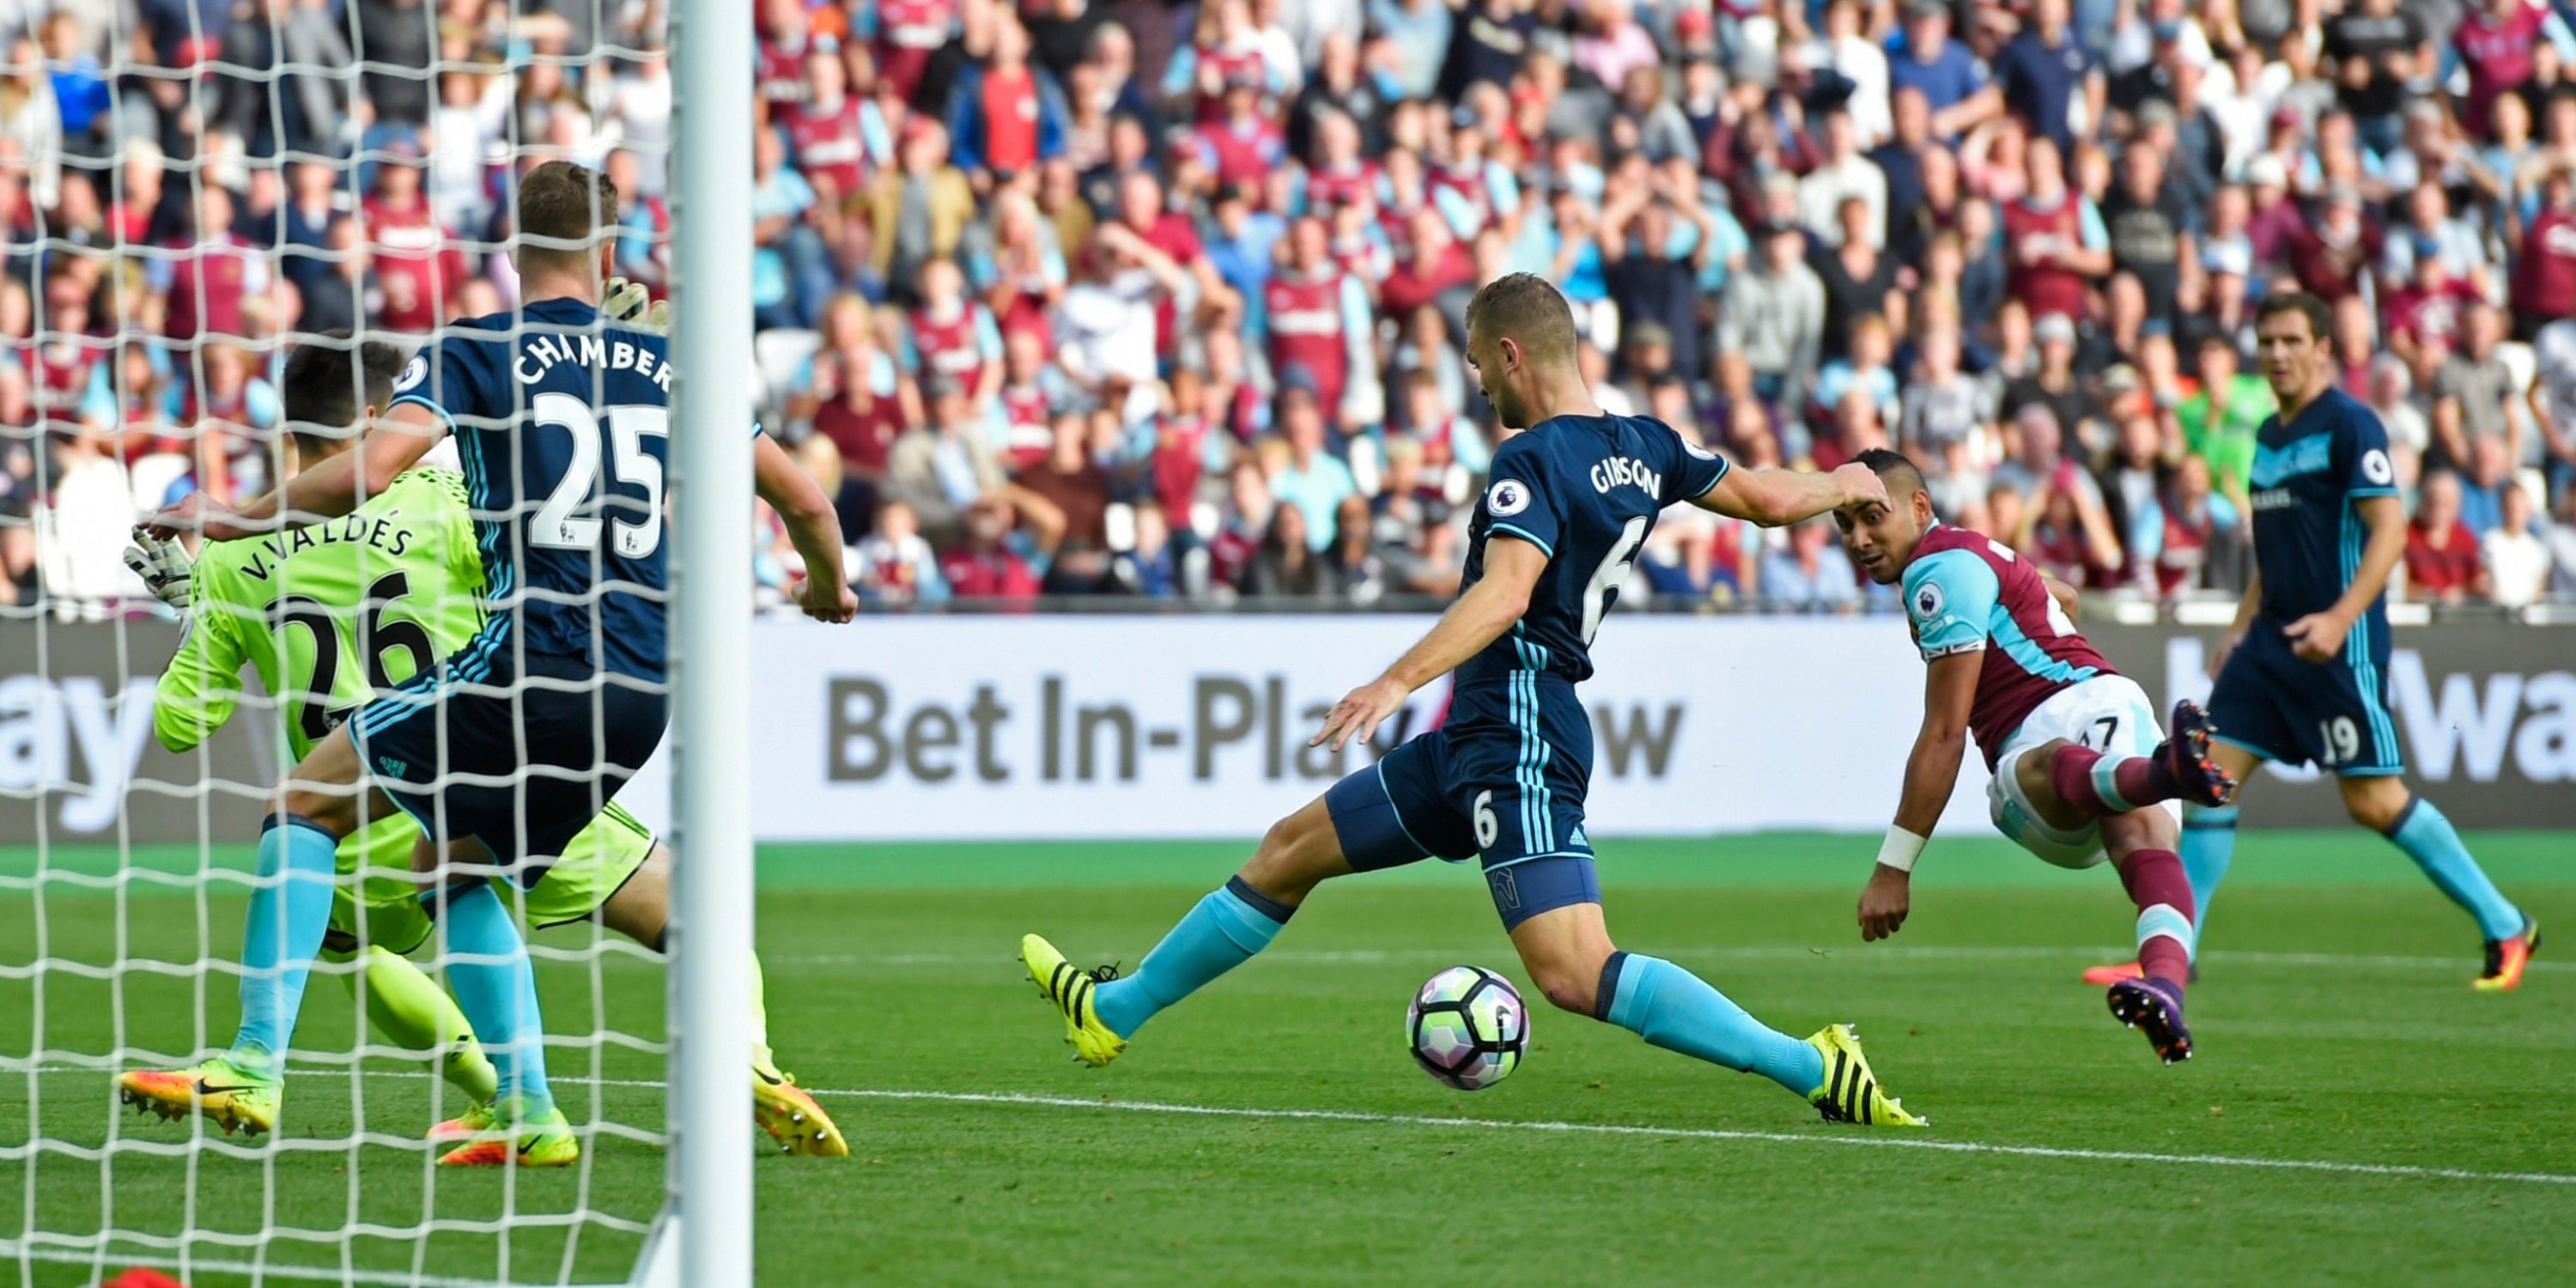 West Ham's Dimitri Payet hits a goal-bound shot through the legs of Middlesbrough's Ben Gibson. 